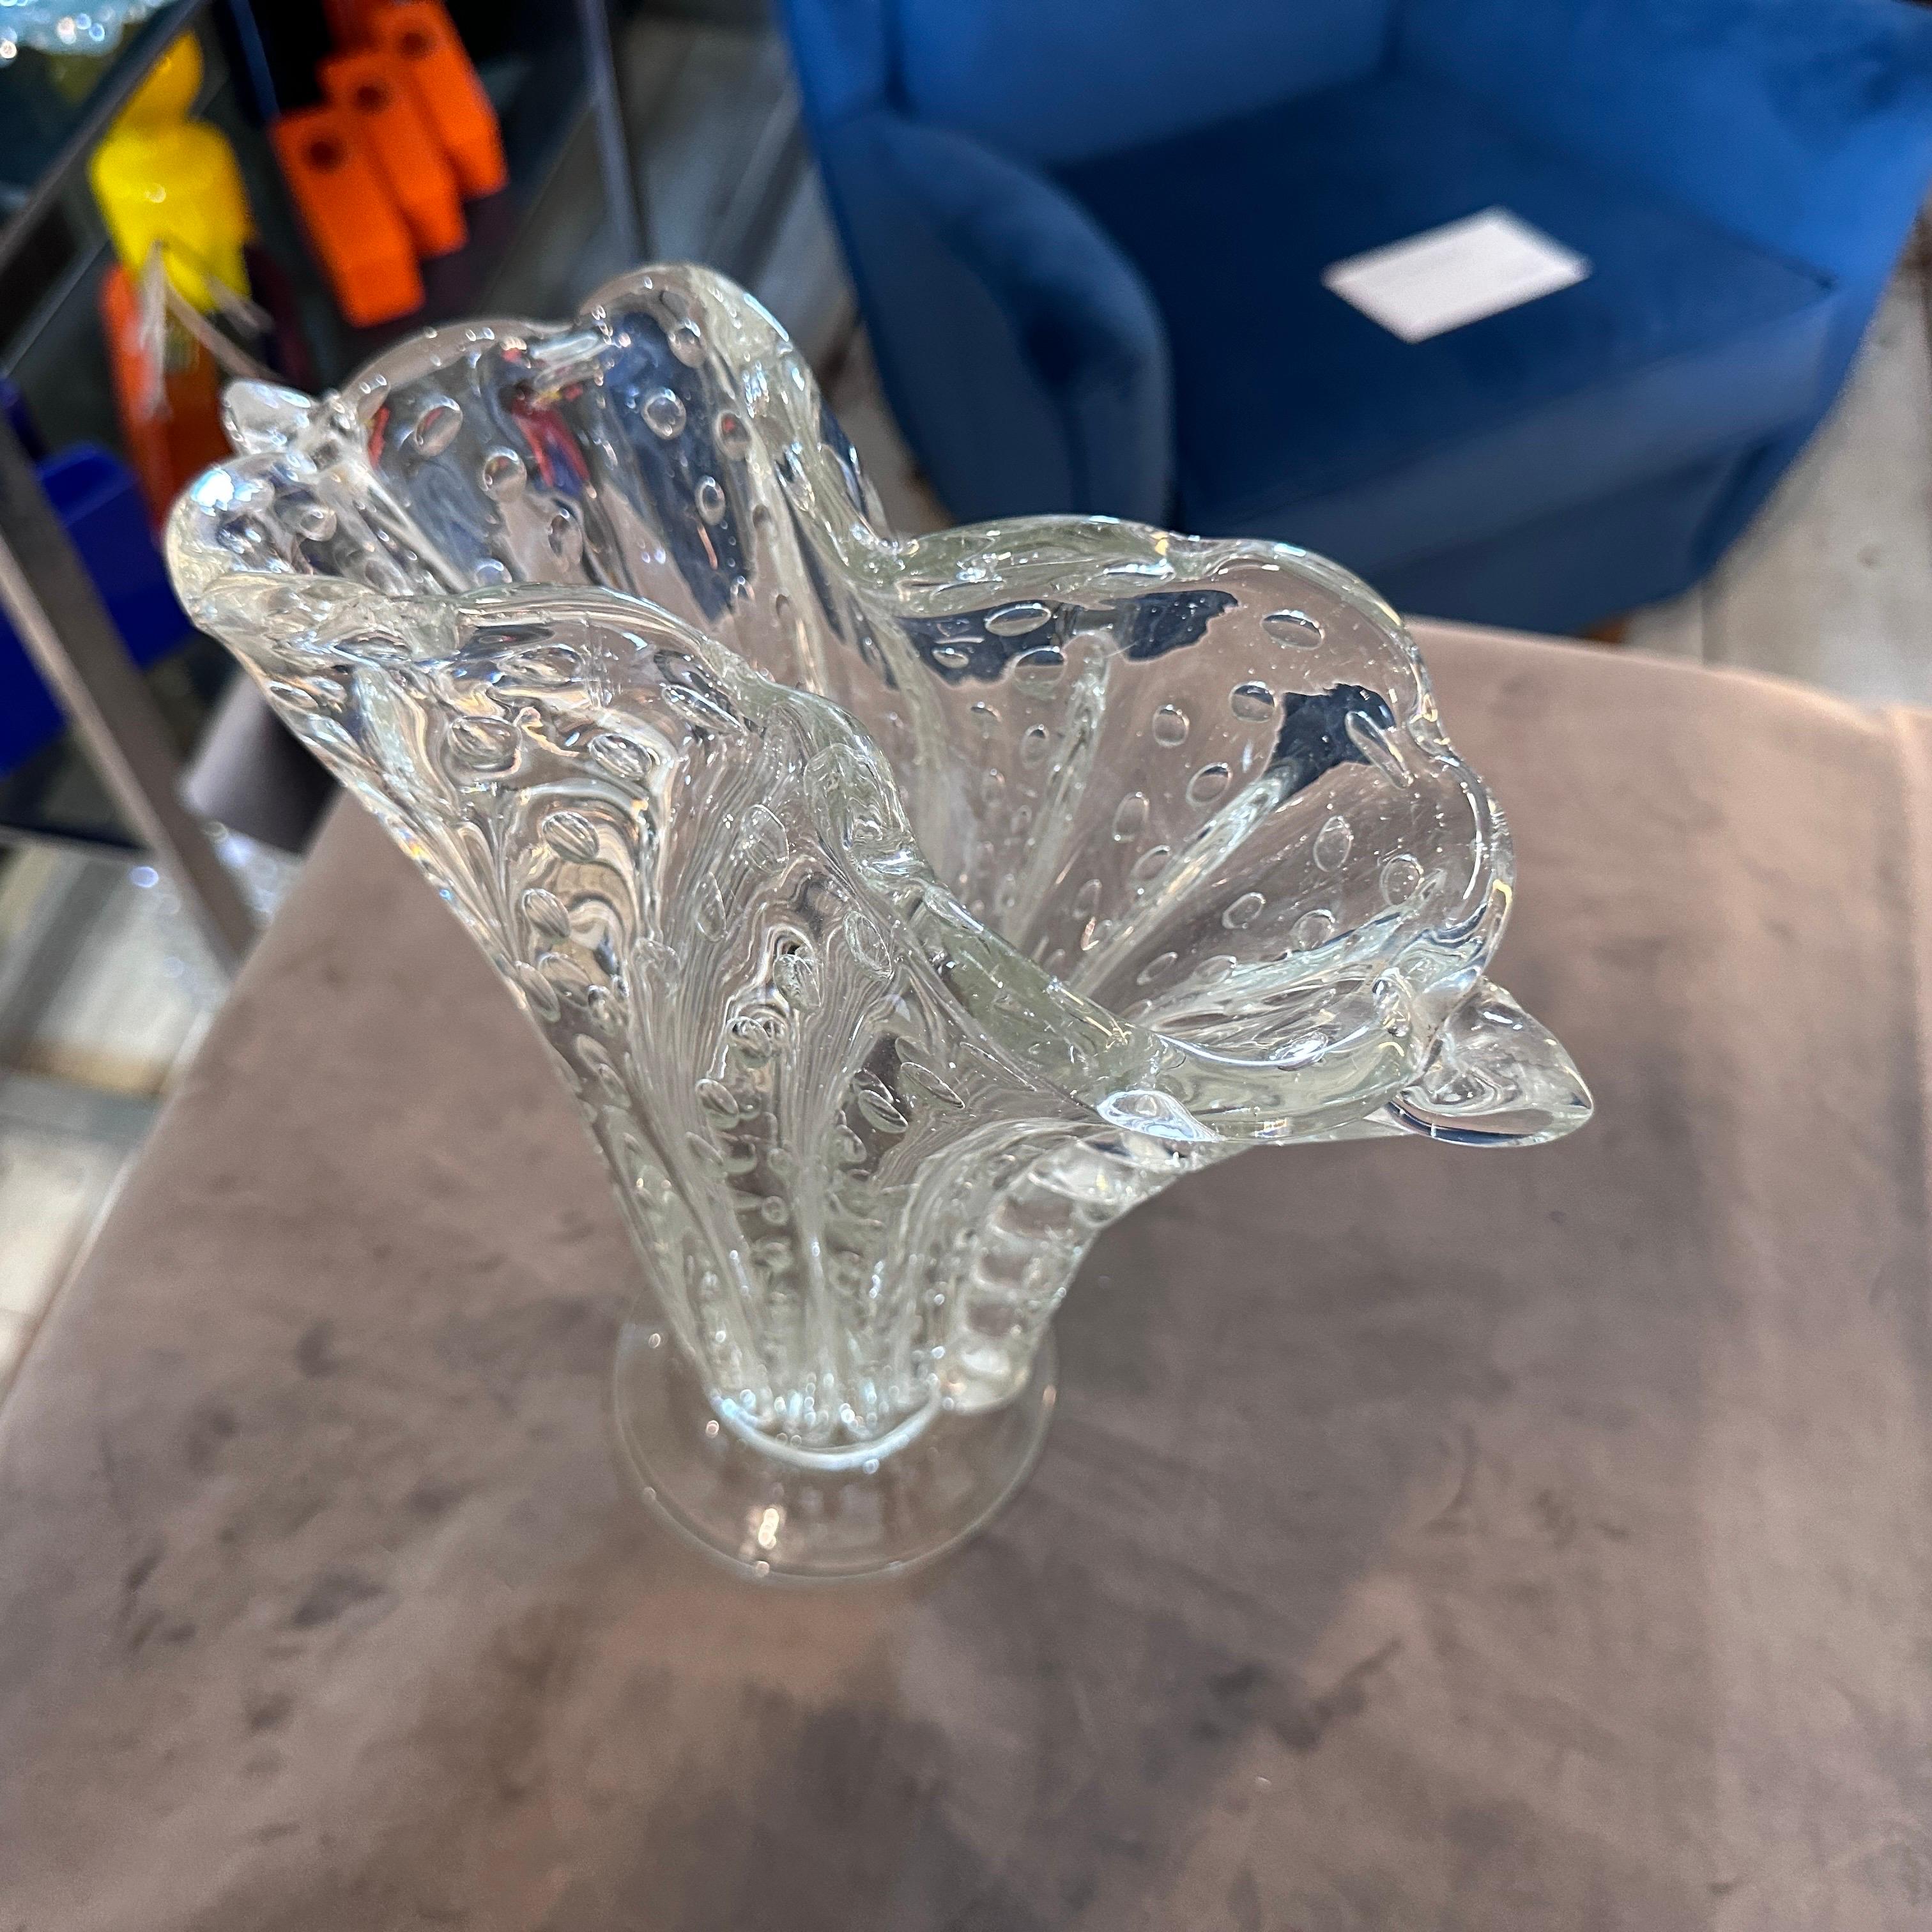 1950s Mid-Century Modern Bullicante Clear Murano Glass Vase by Barovier For Sale 4